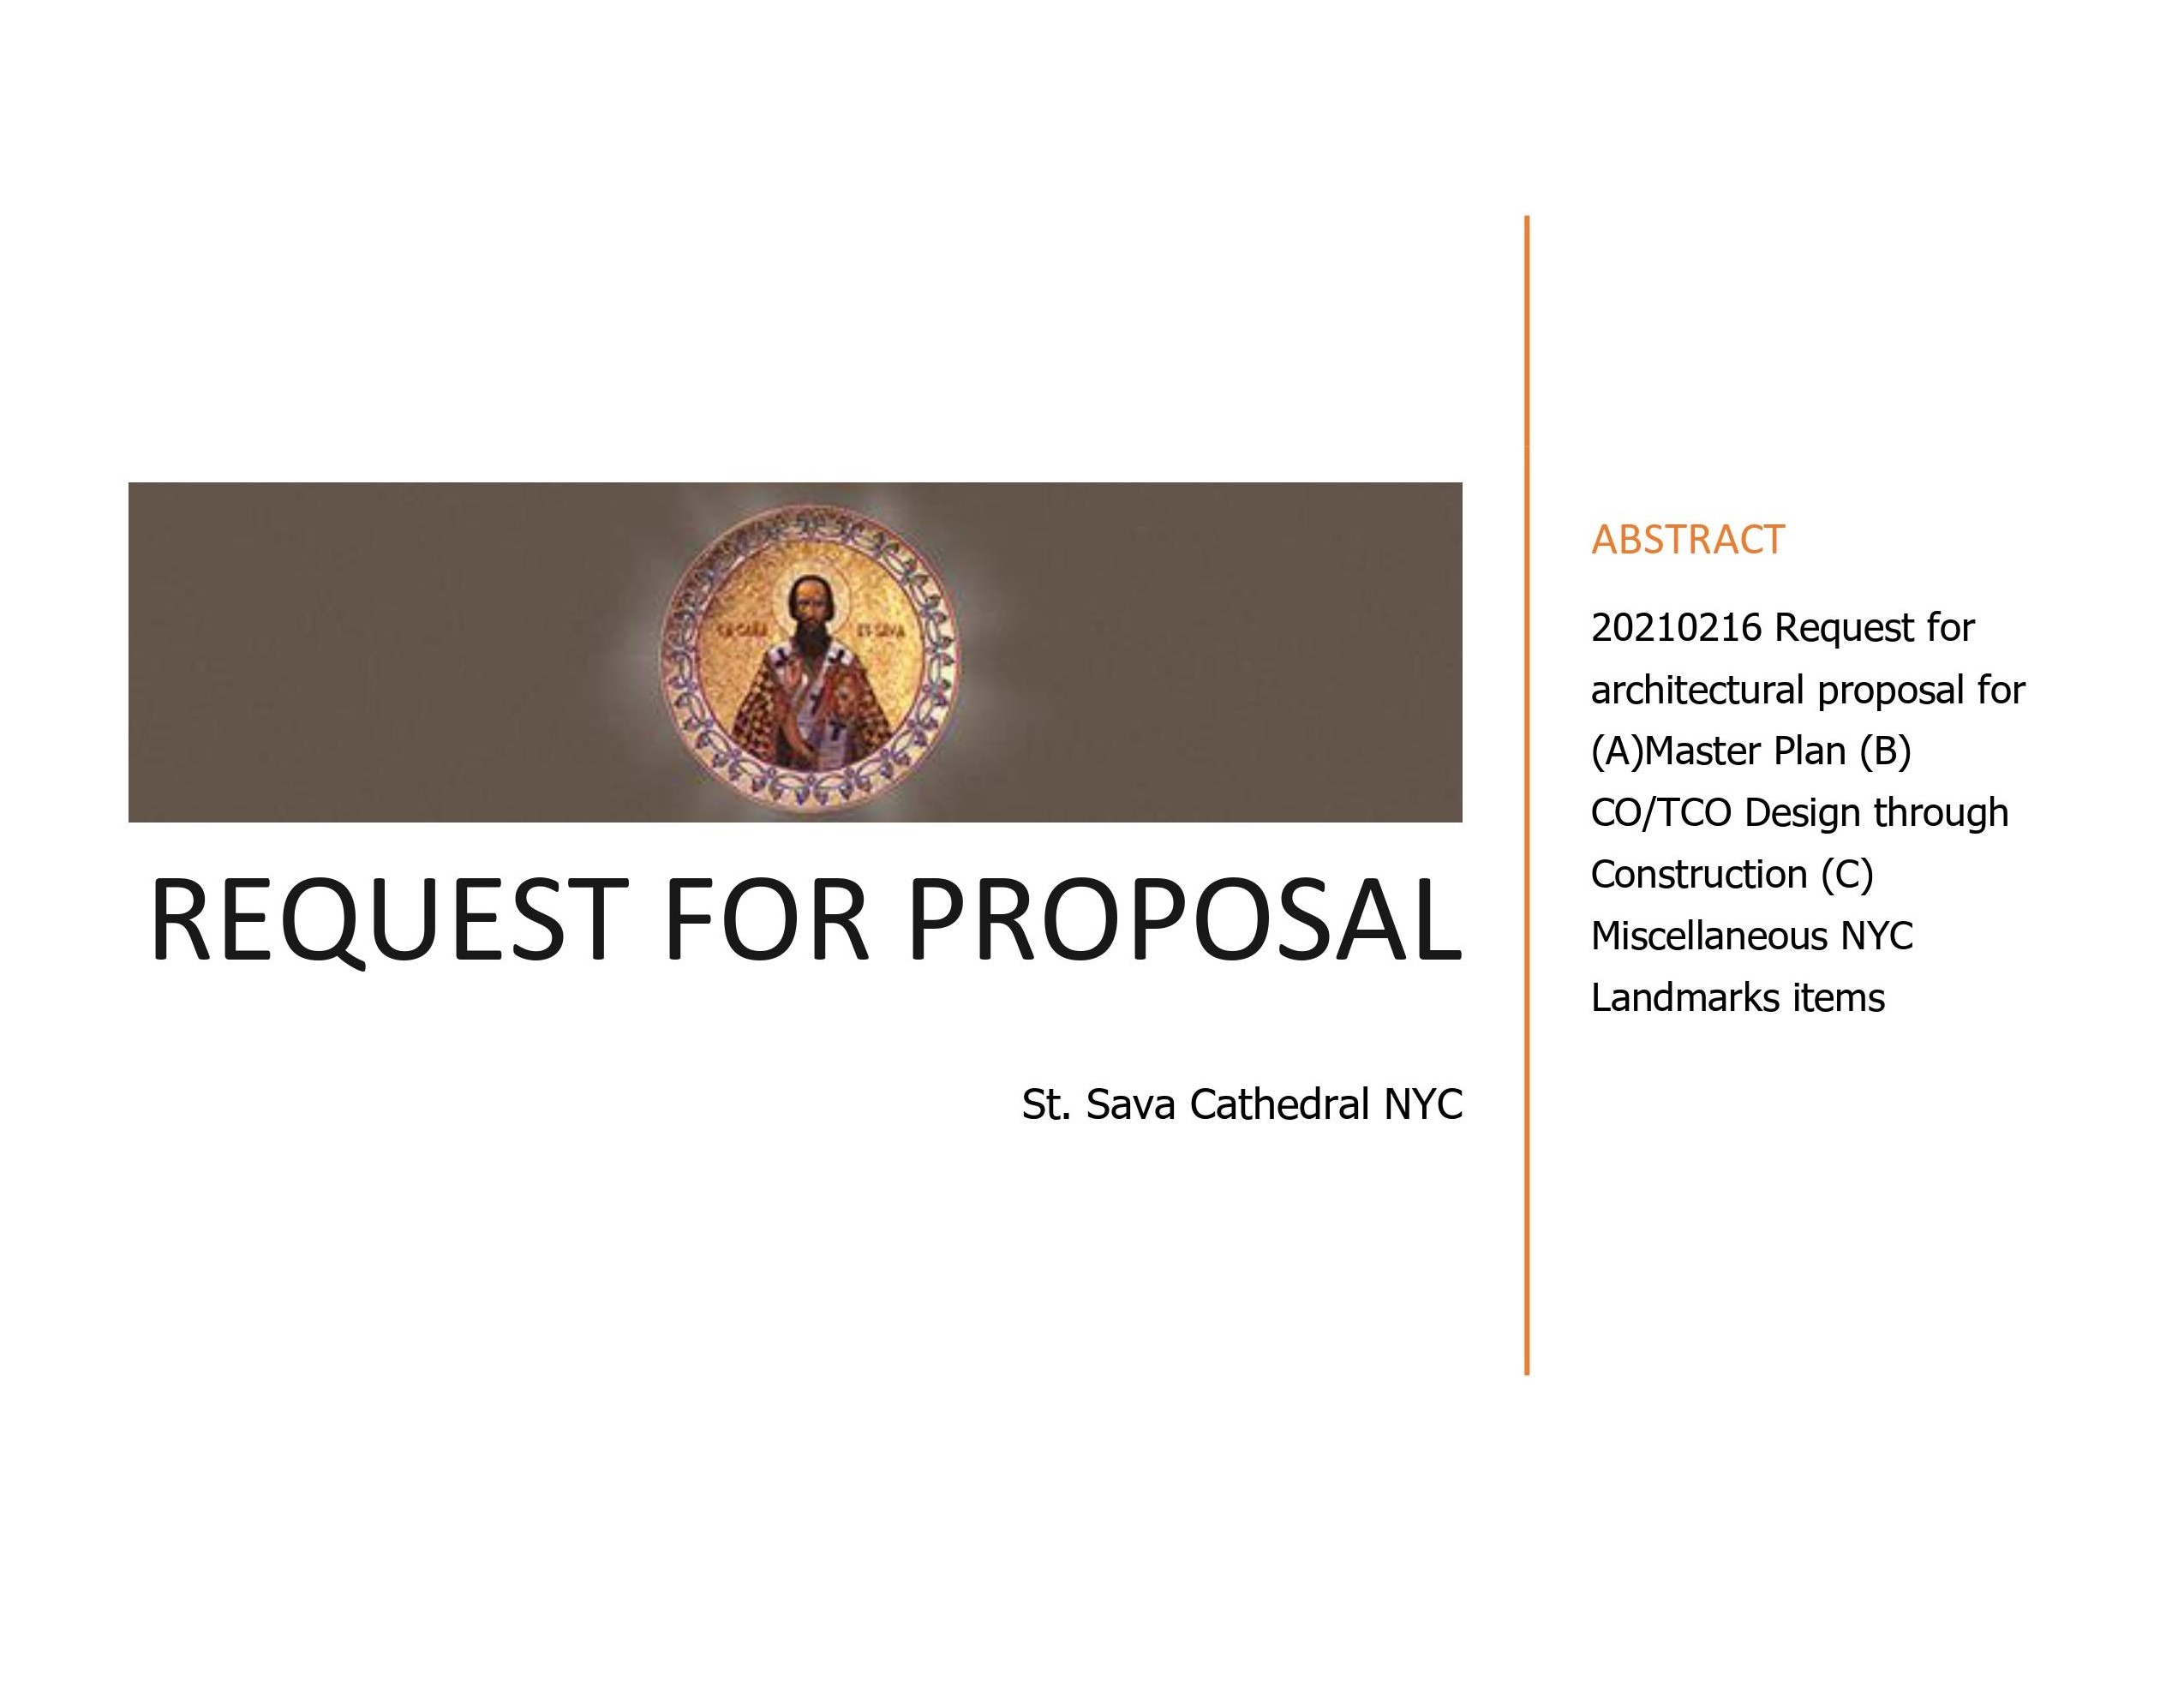 REQUEST FOR PROPOSAL – SAINT SAVA CATHEDRAL